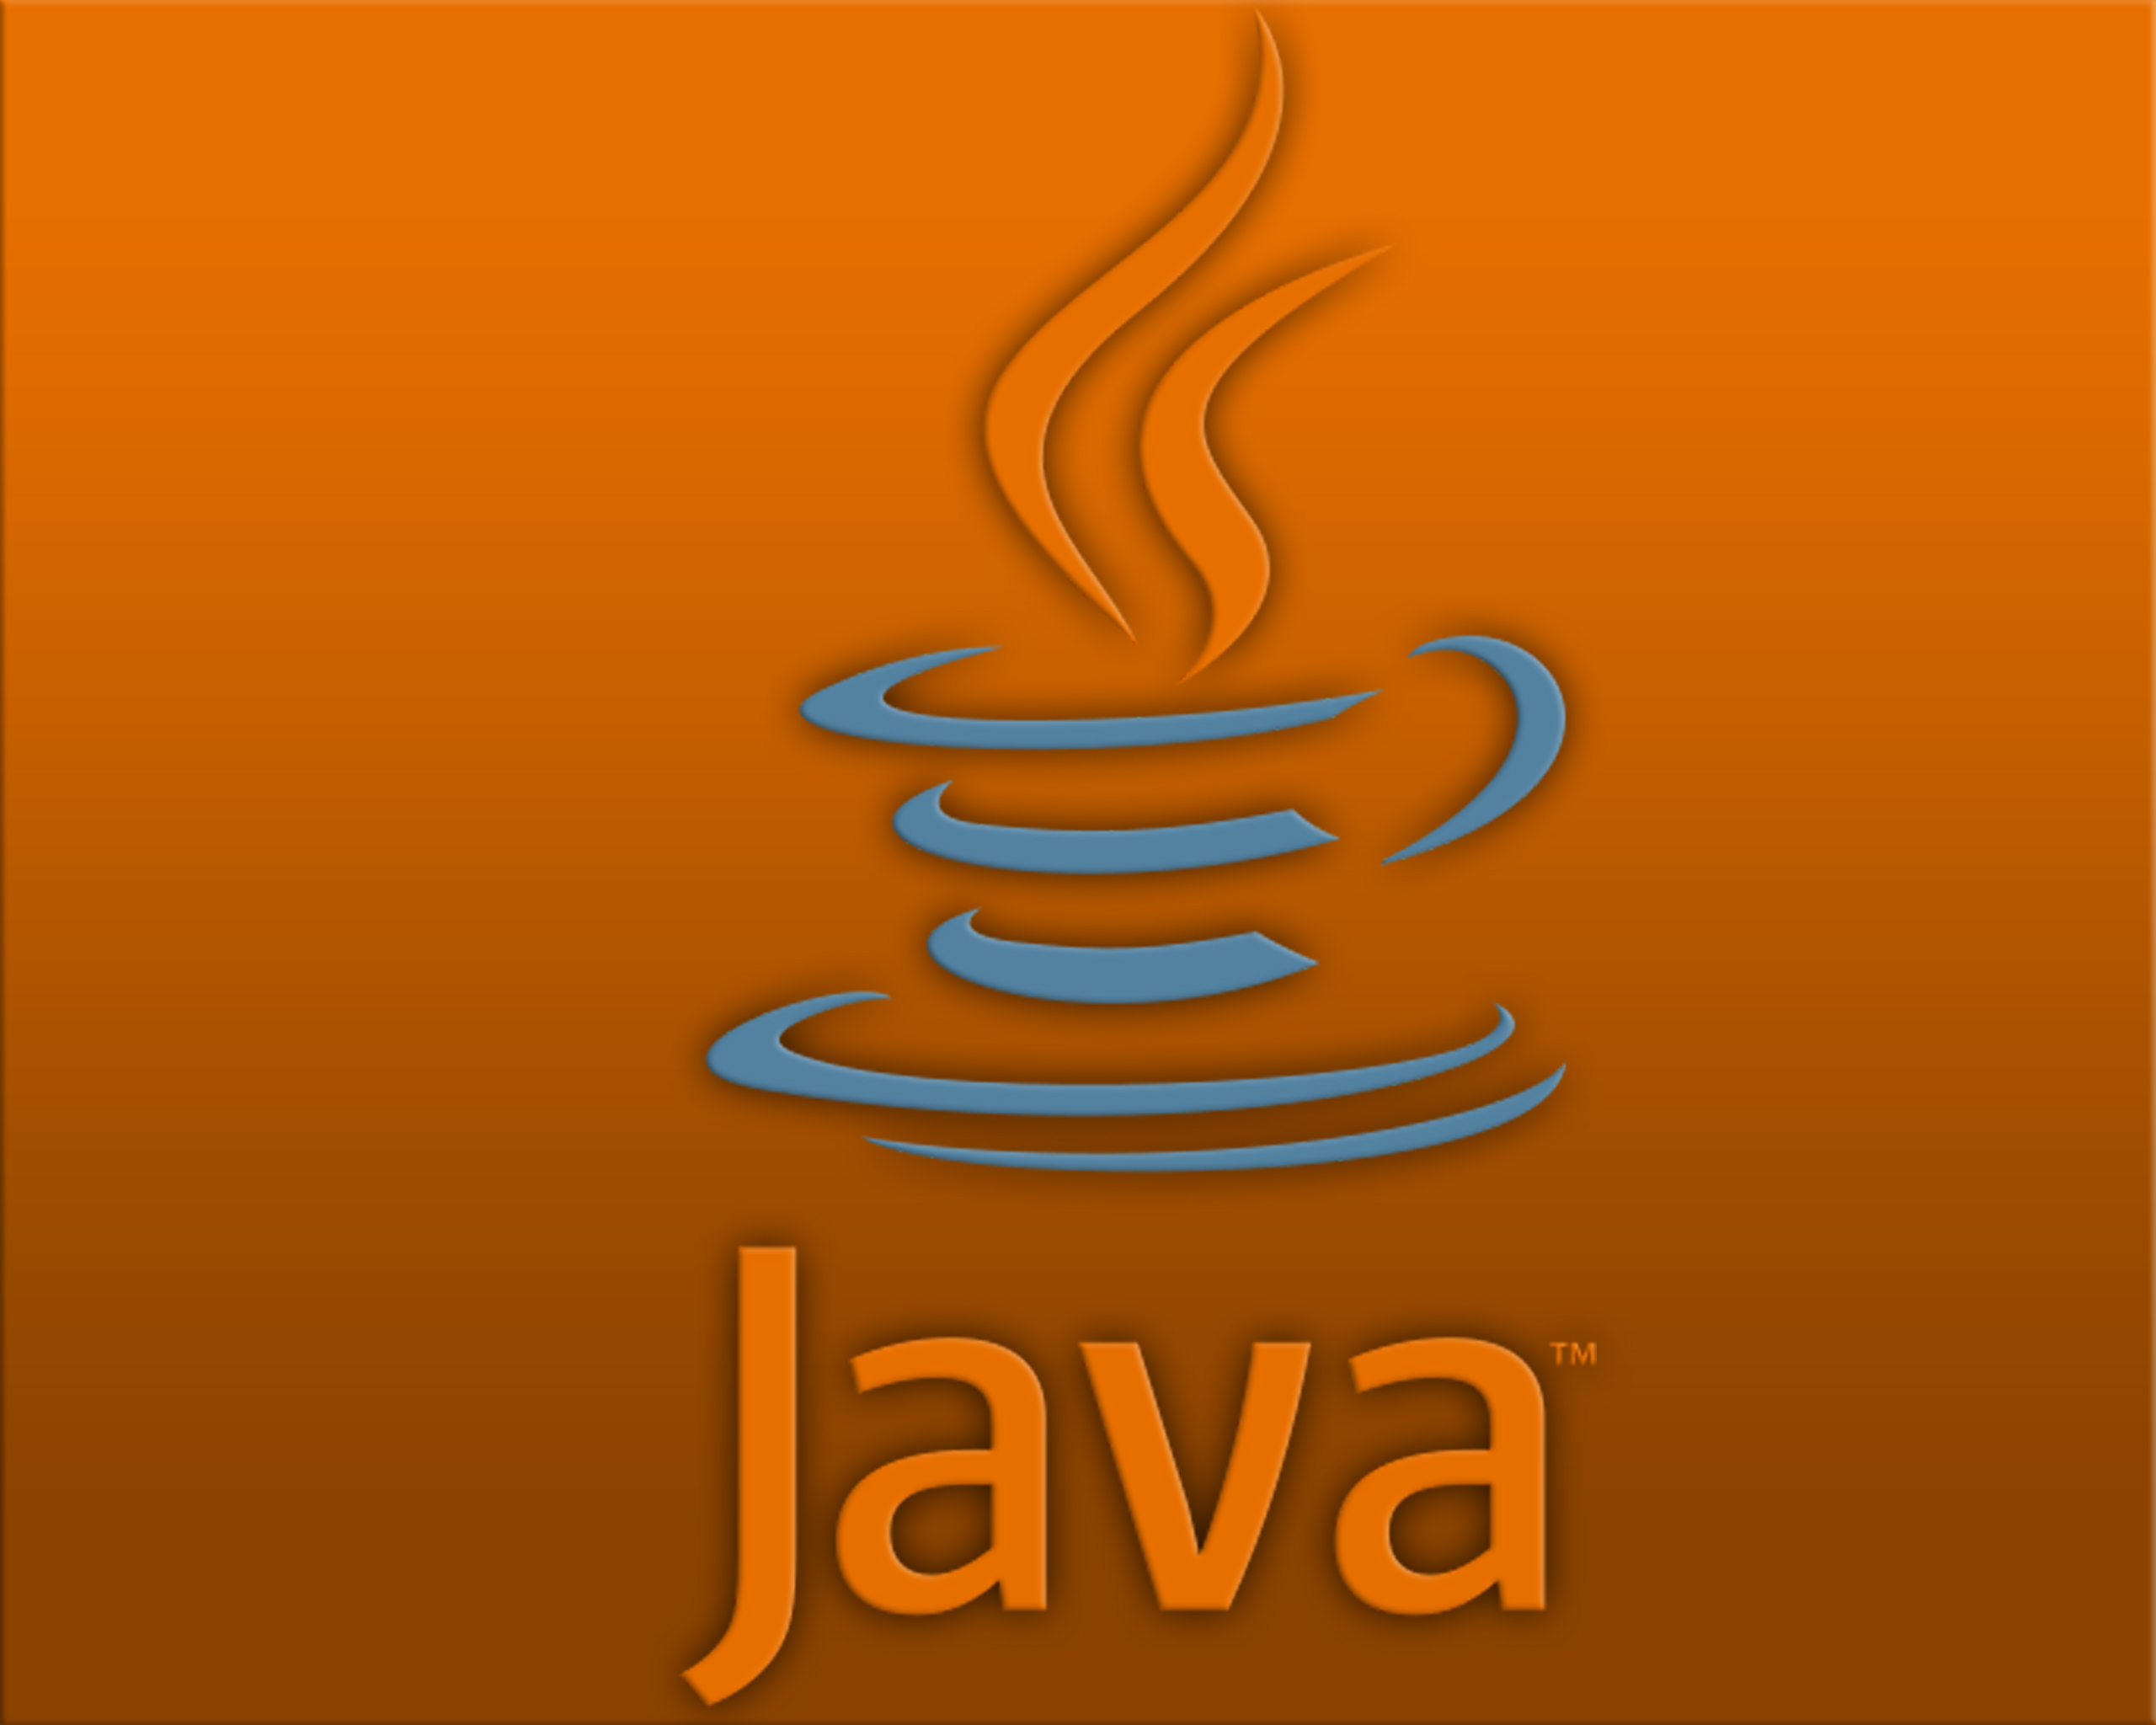 The first version of the Java programming language is released on May 23rd